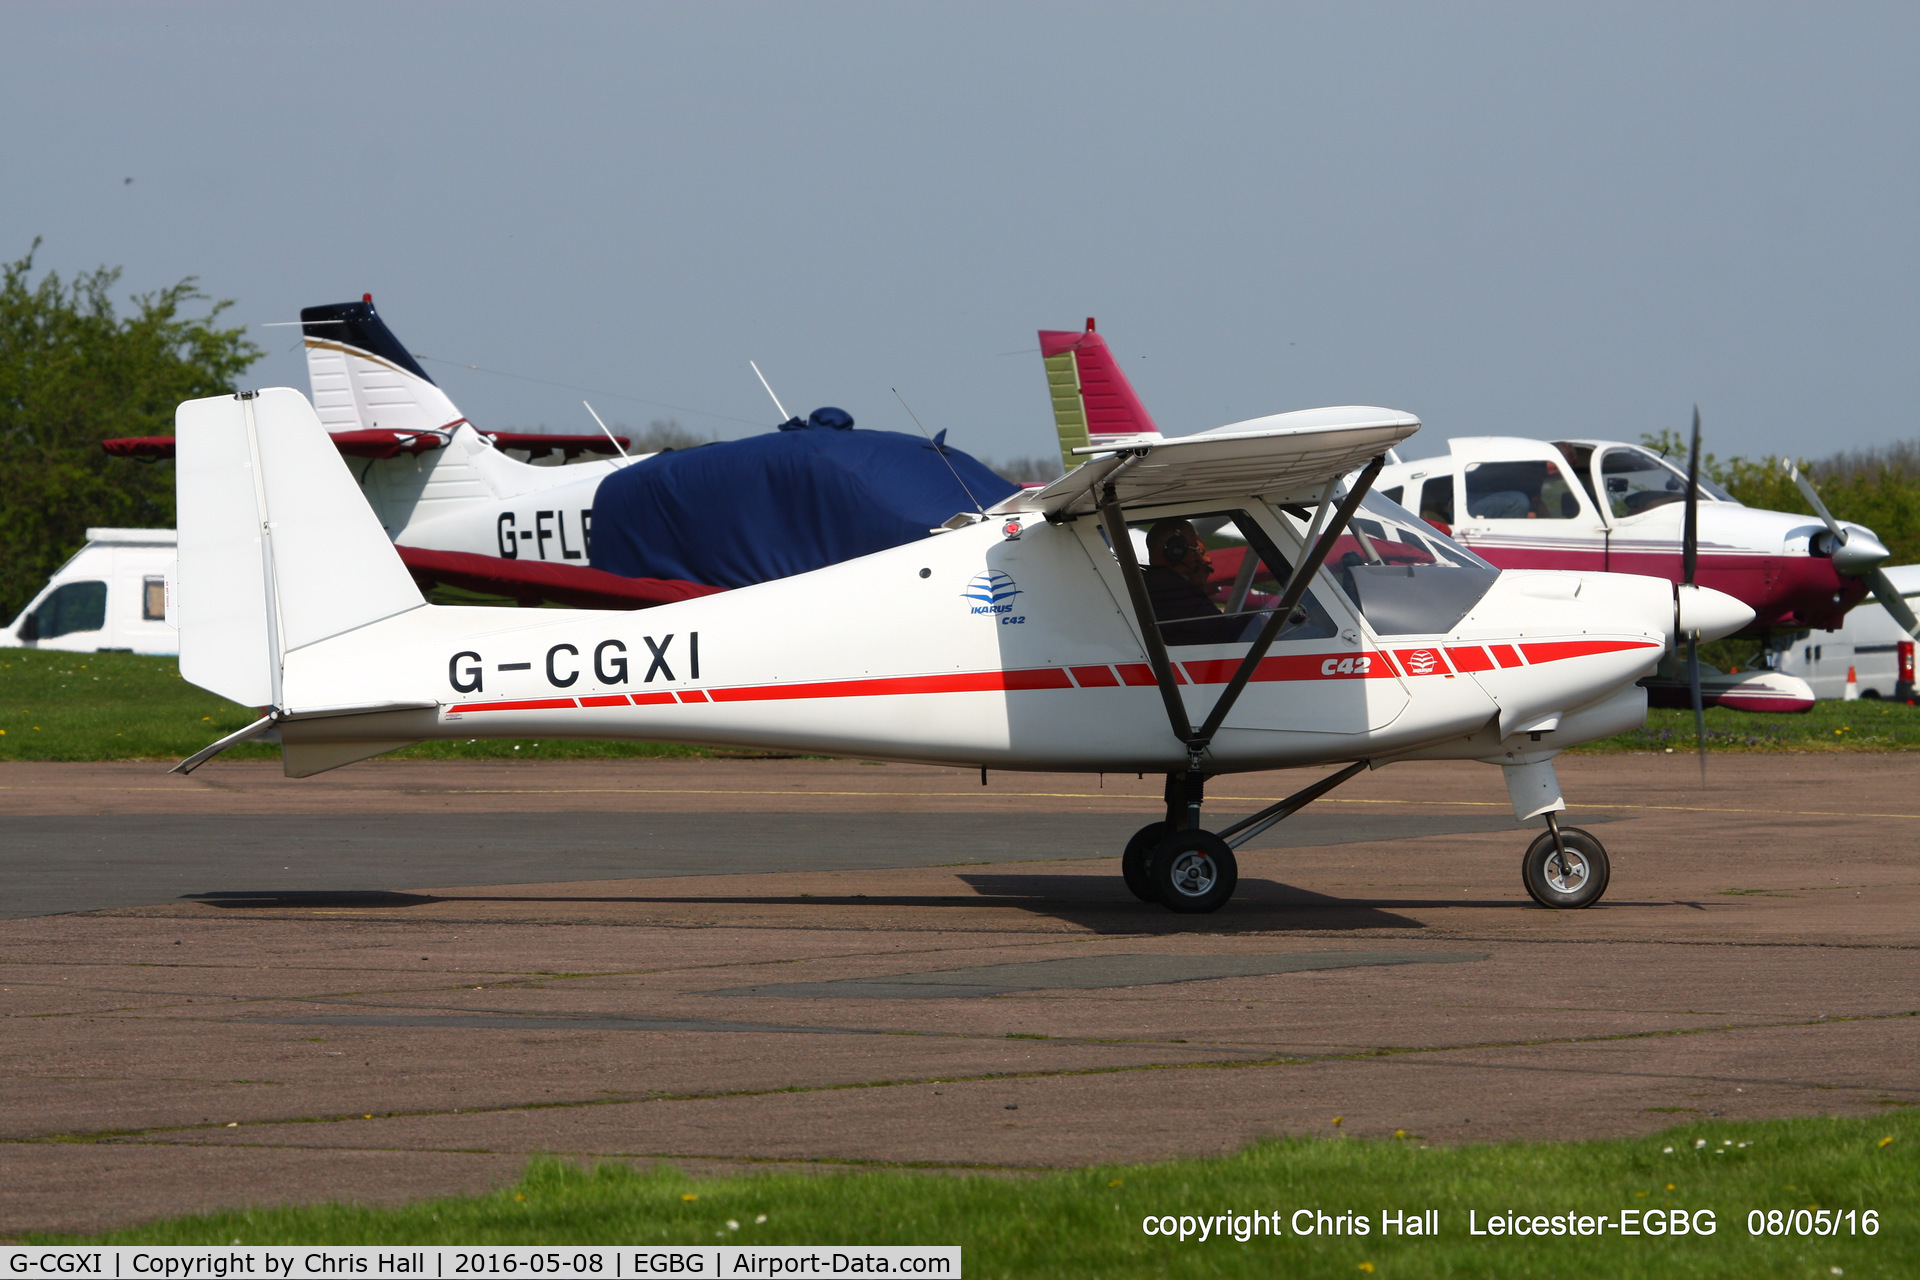 G-CGXI, 2011 Comco Ikarus C42 FB80 C/N 1106-7157, at Leicester